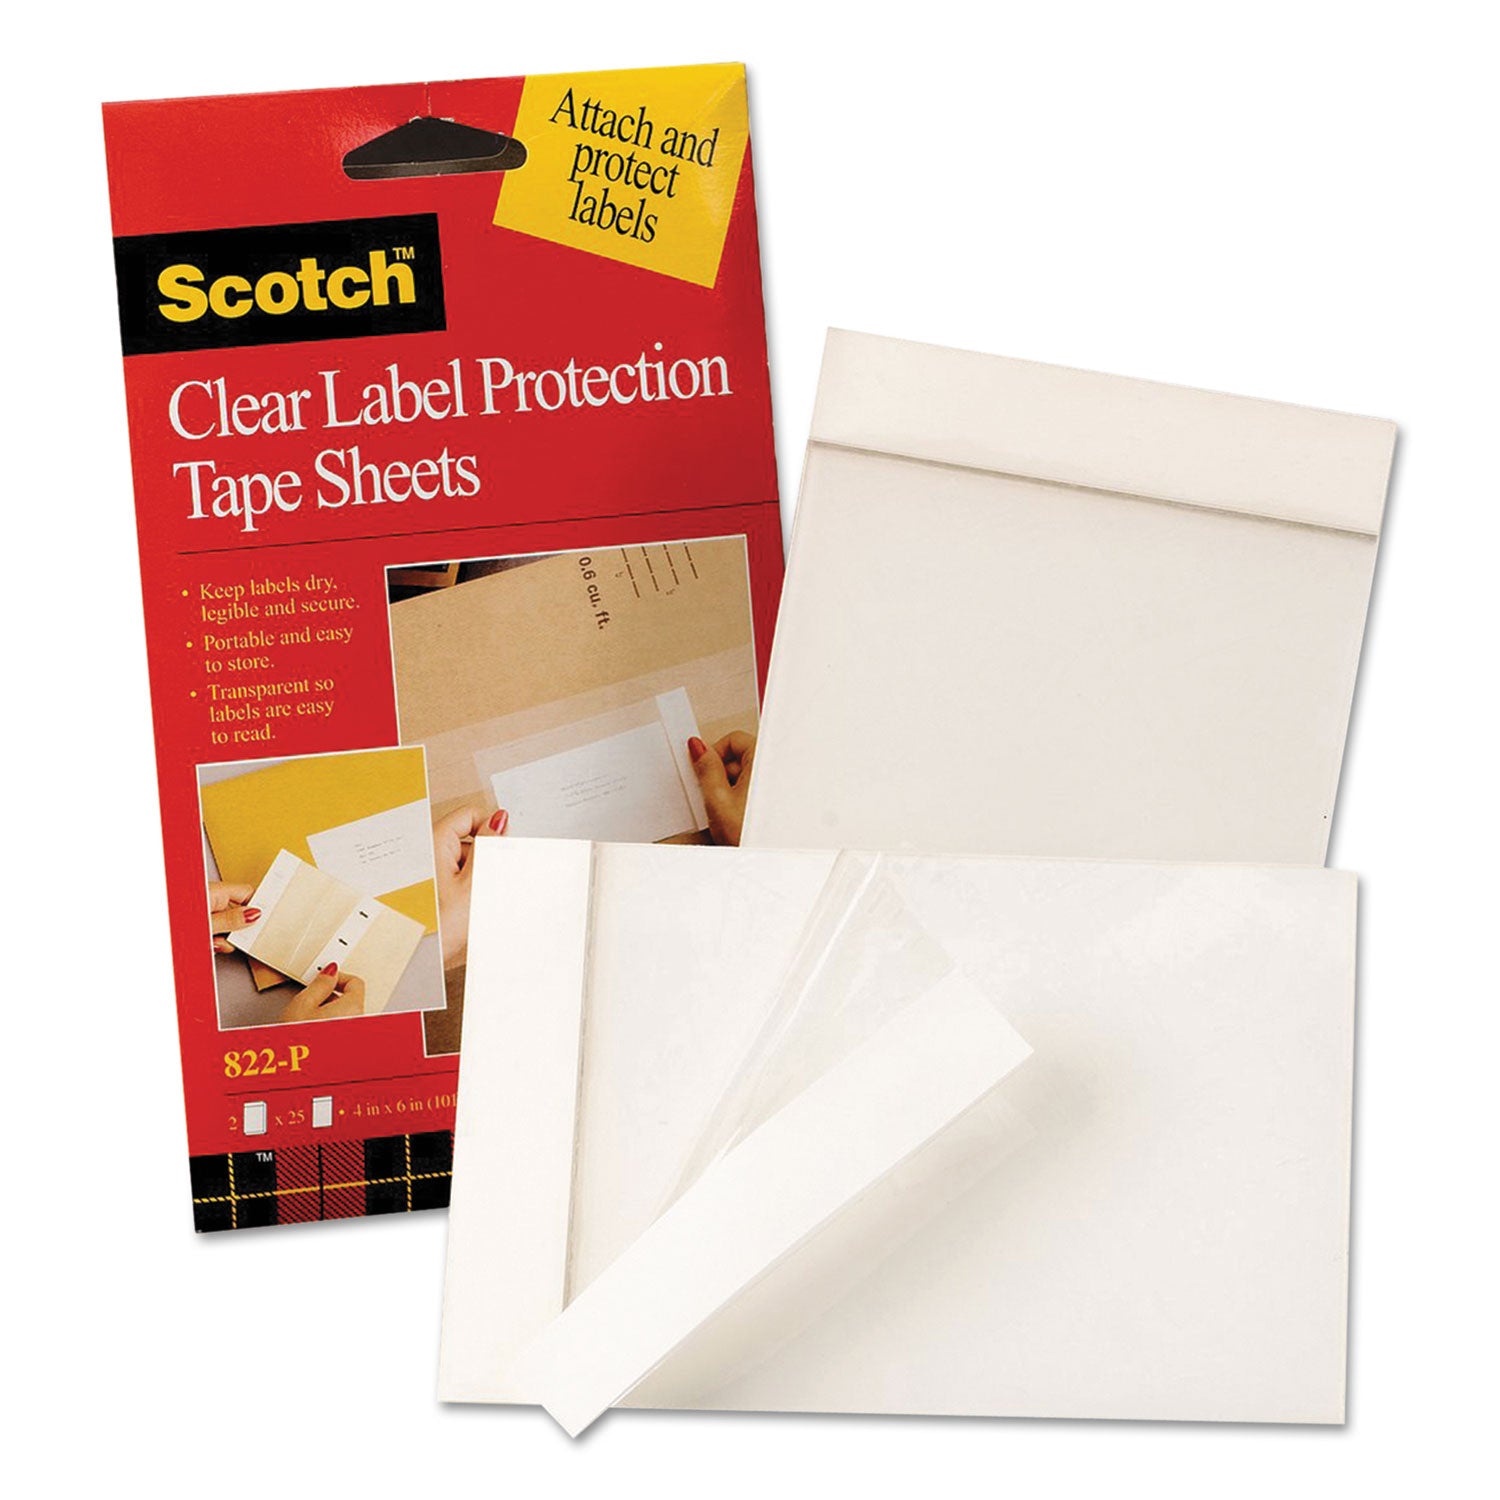 ScotchPad Label Protection Tape Sheets, 4" x 6", Clear, 25/Pad, 2 Pads/Pack - 